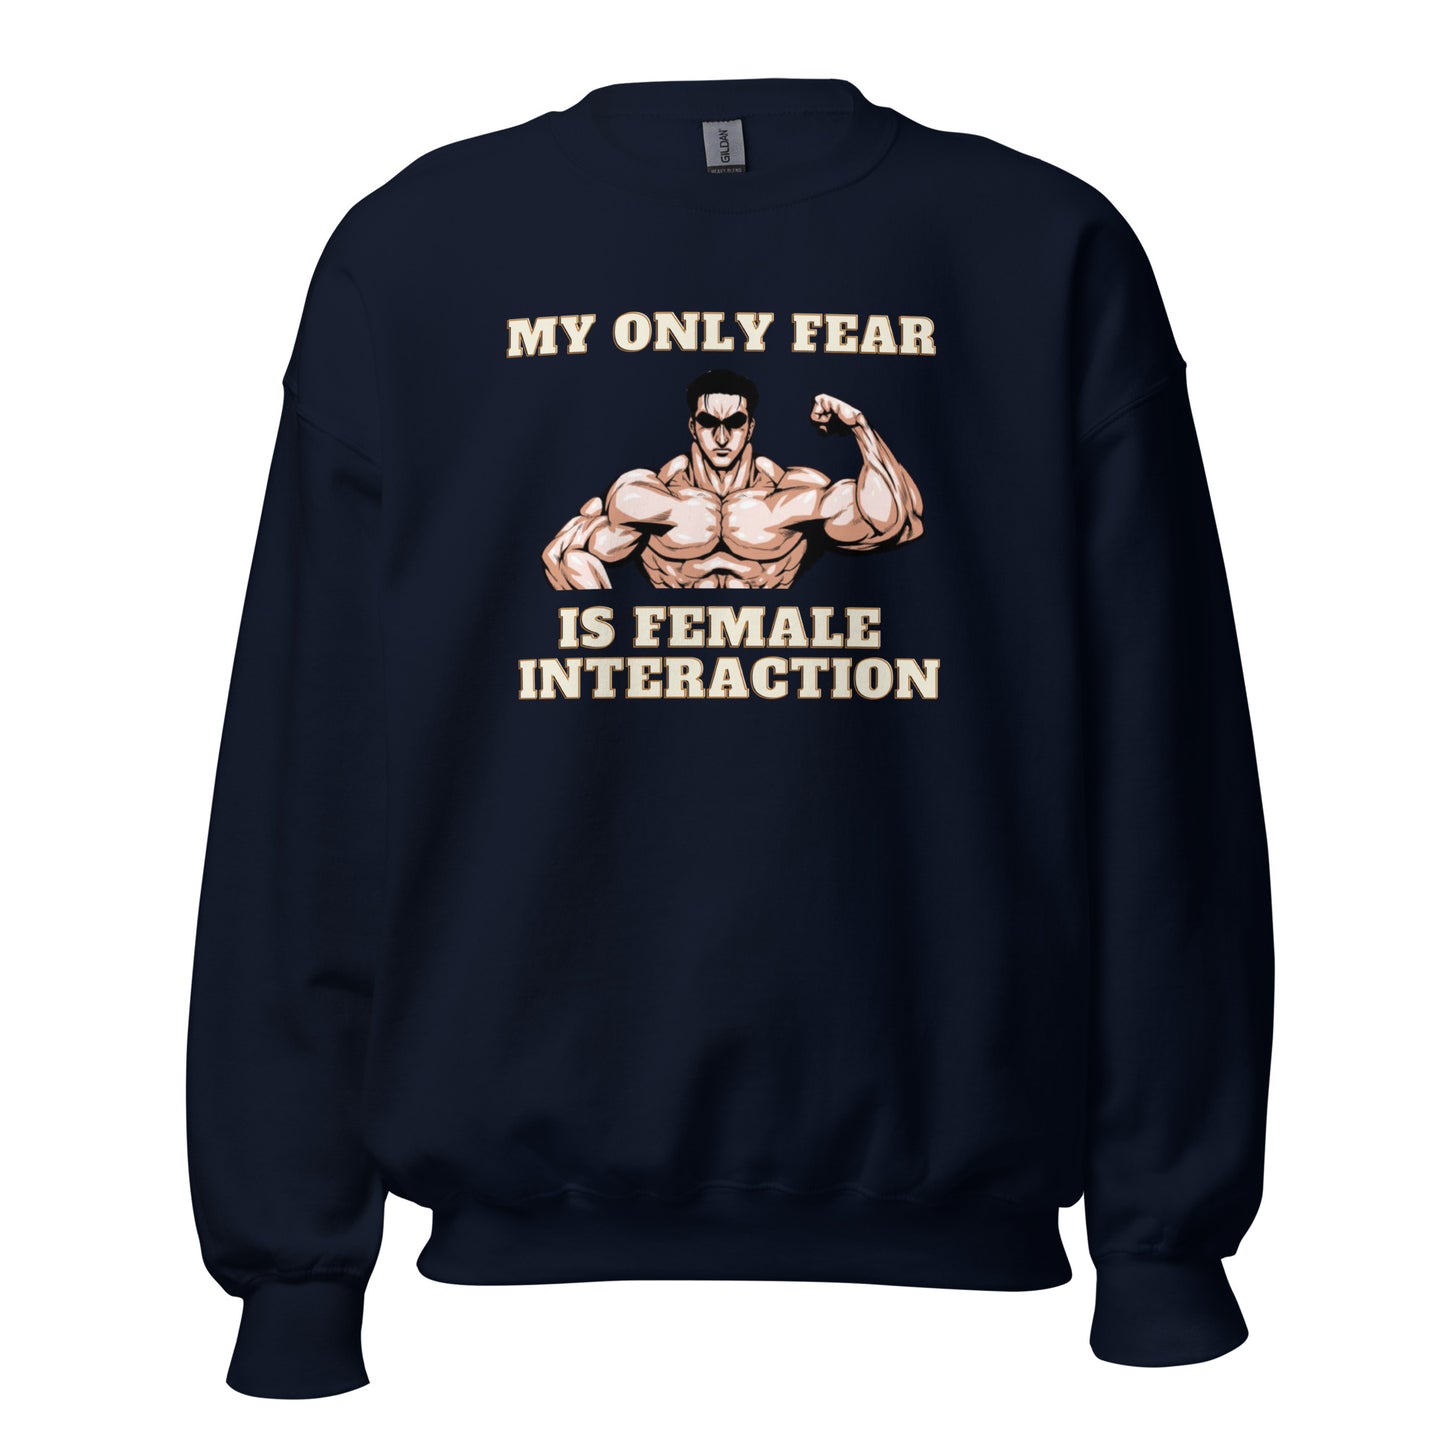 MY ONLY FEAR IS FEMALE INTERACTION